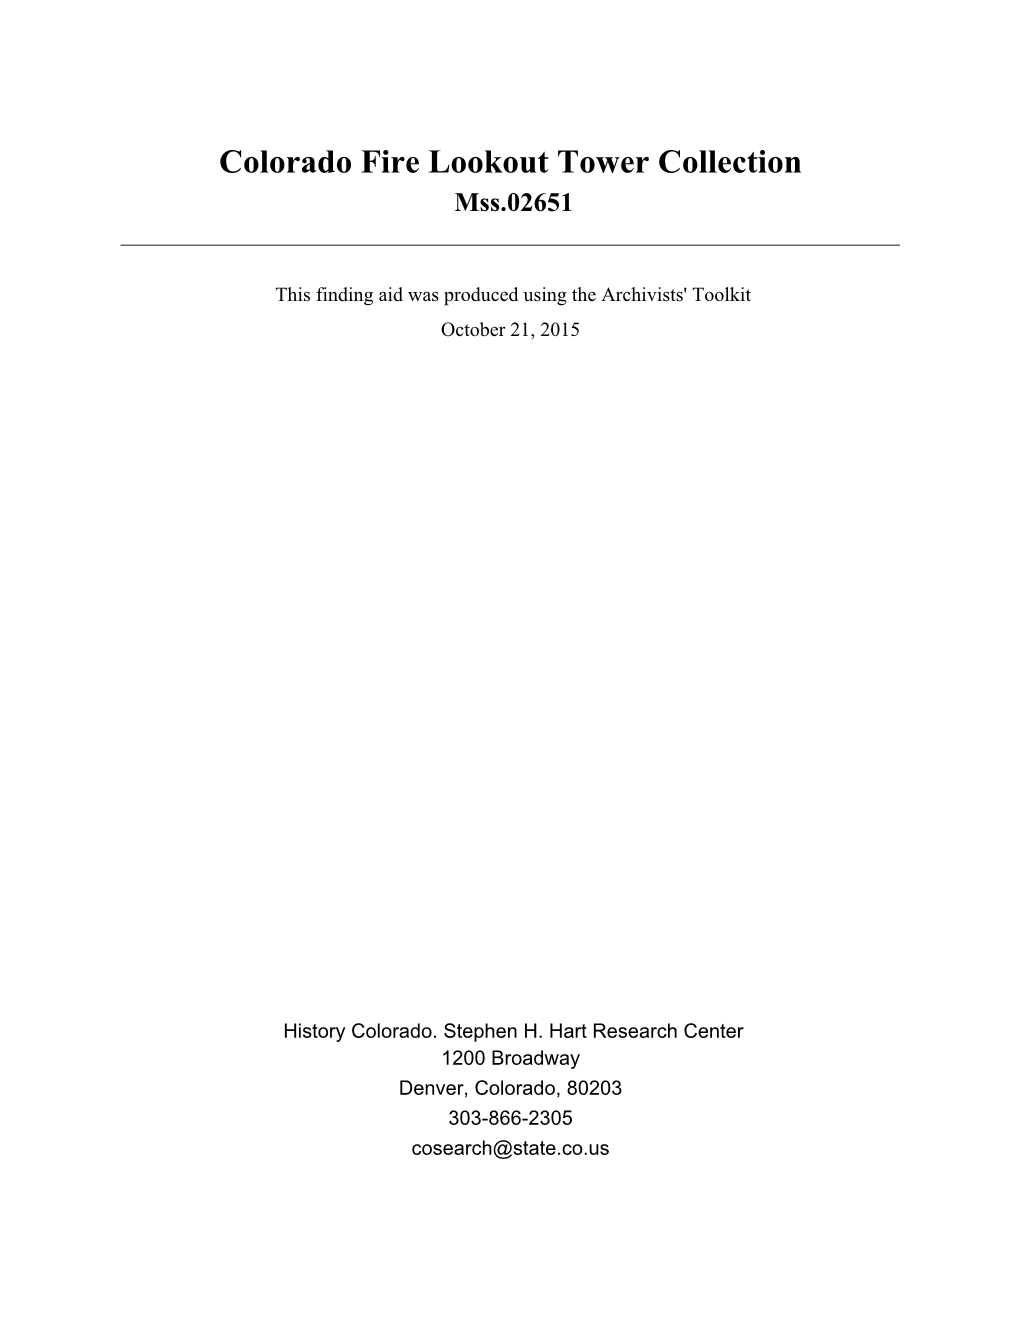 Colorado Fire Lookout Tower Collection Mss.02651